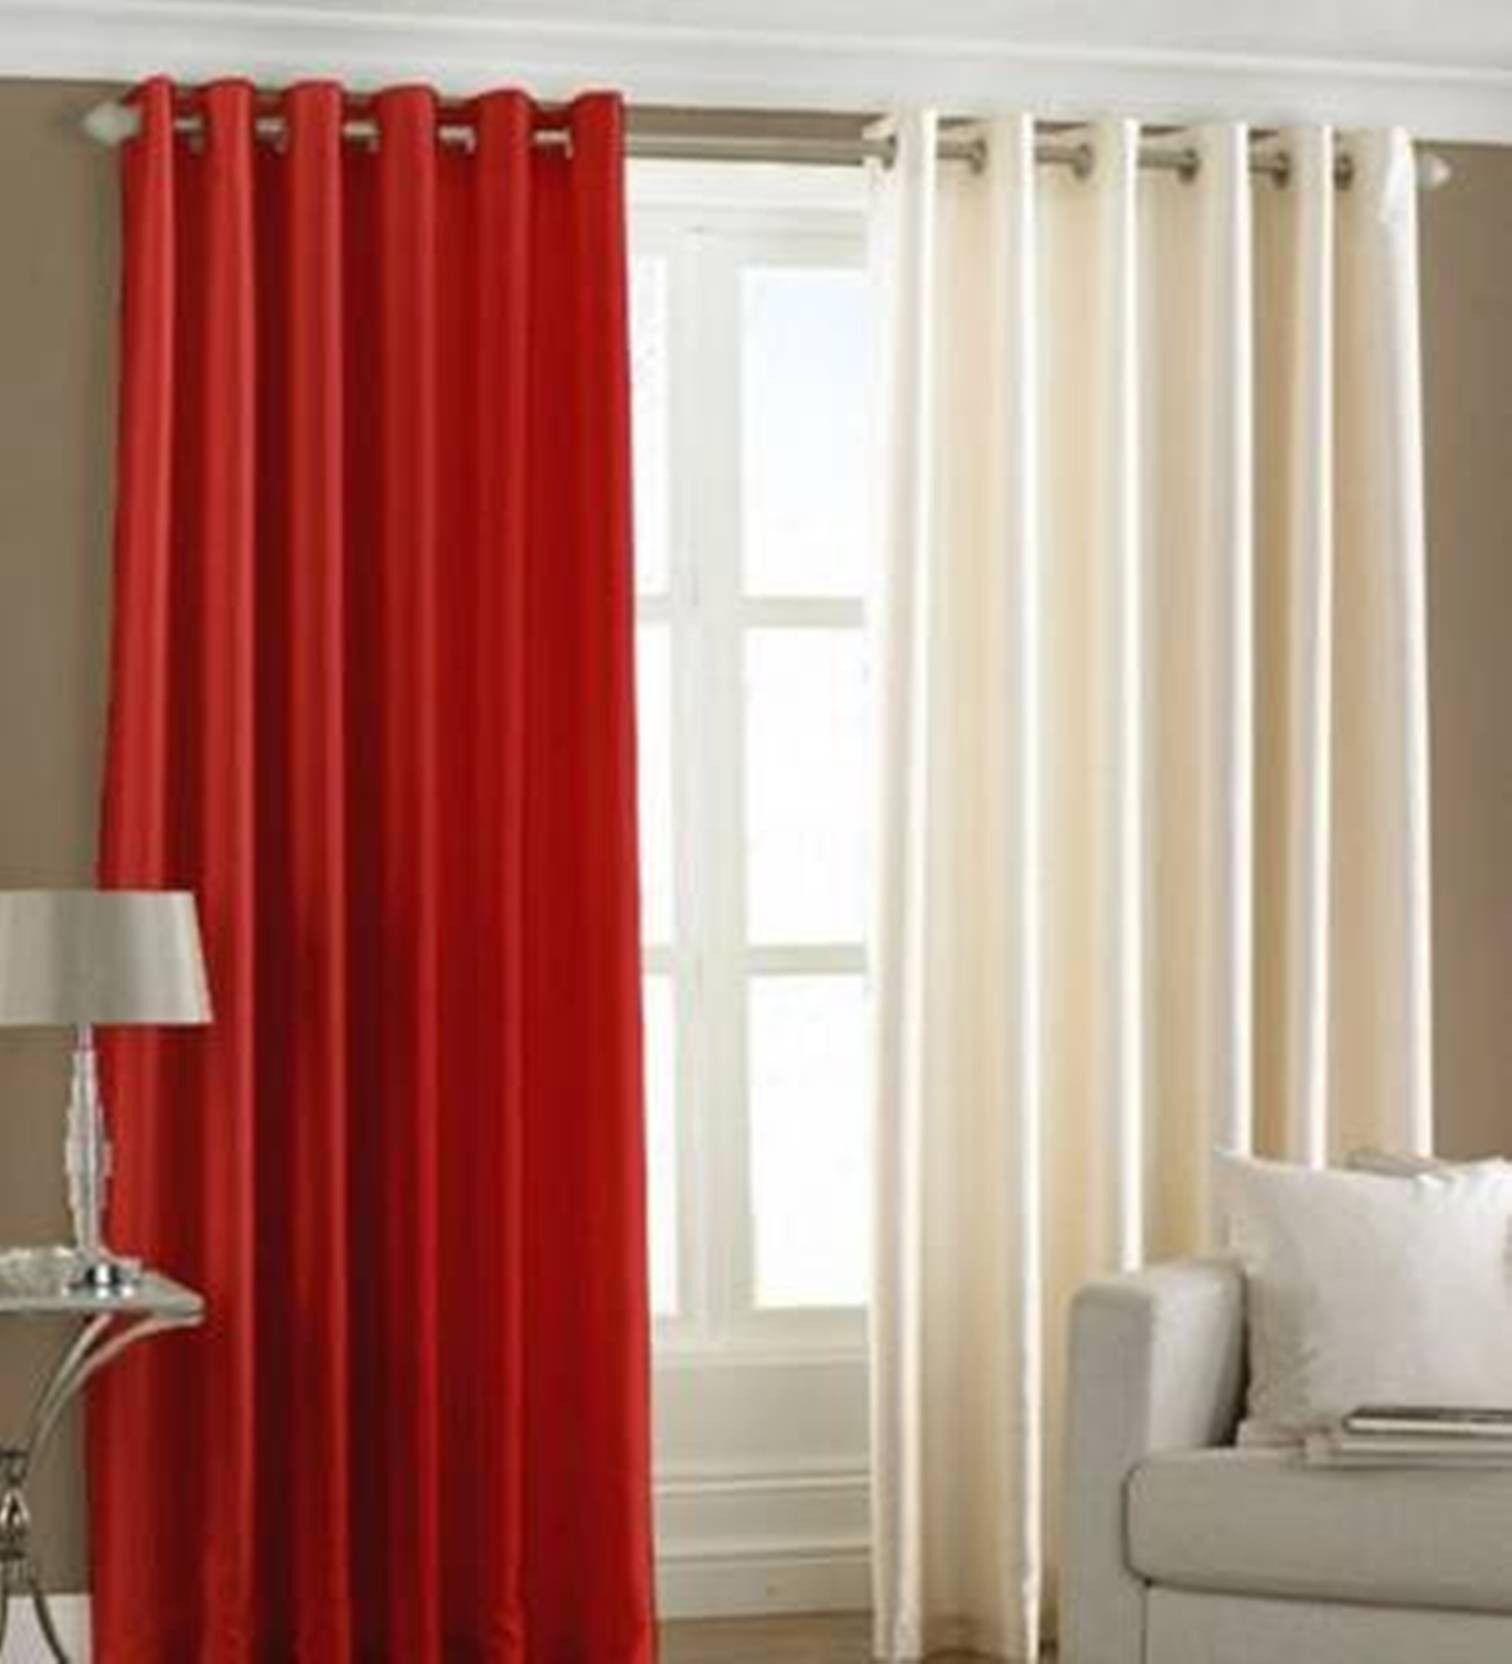     			N2C Home Solid Semi-Transparent Eyelet Curtain 9 ft ( Pack of 2 ) - Red